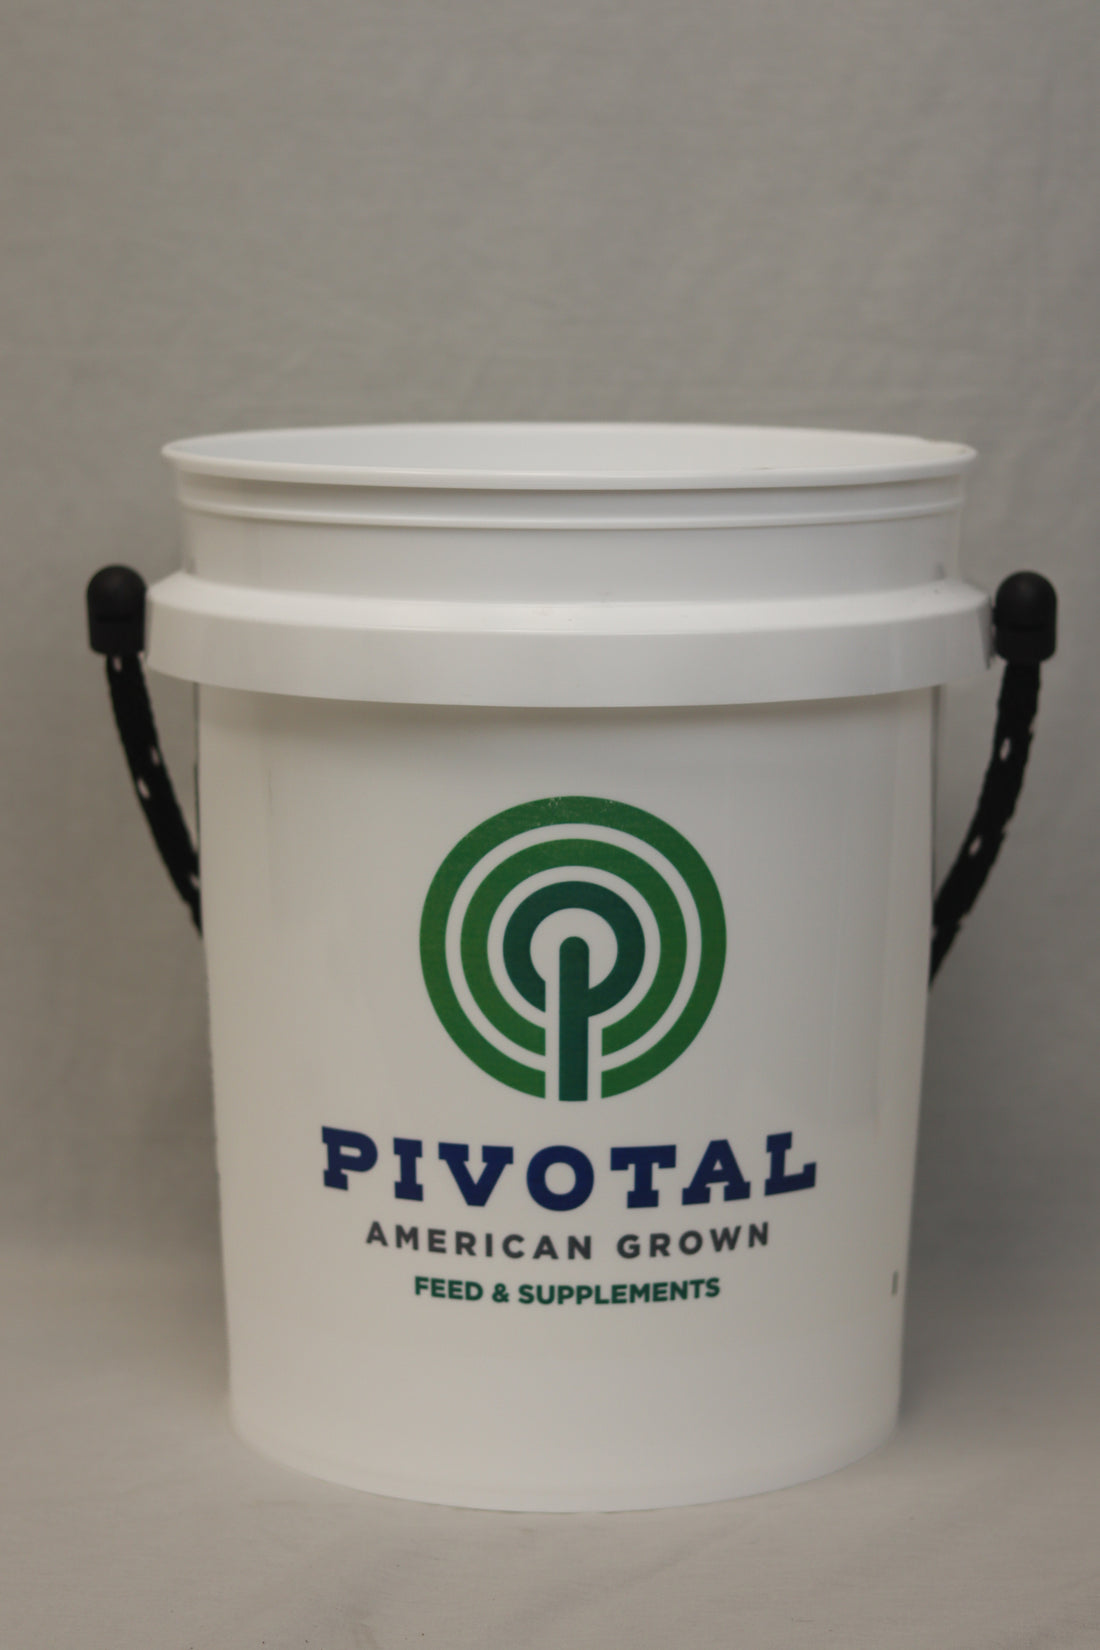 Pivotal Feeds 5 Gallon Bucket w/Handle for Pouring